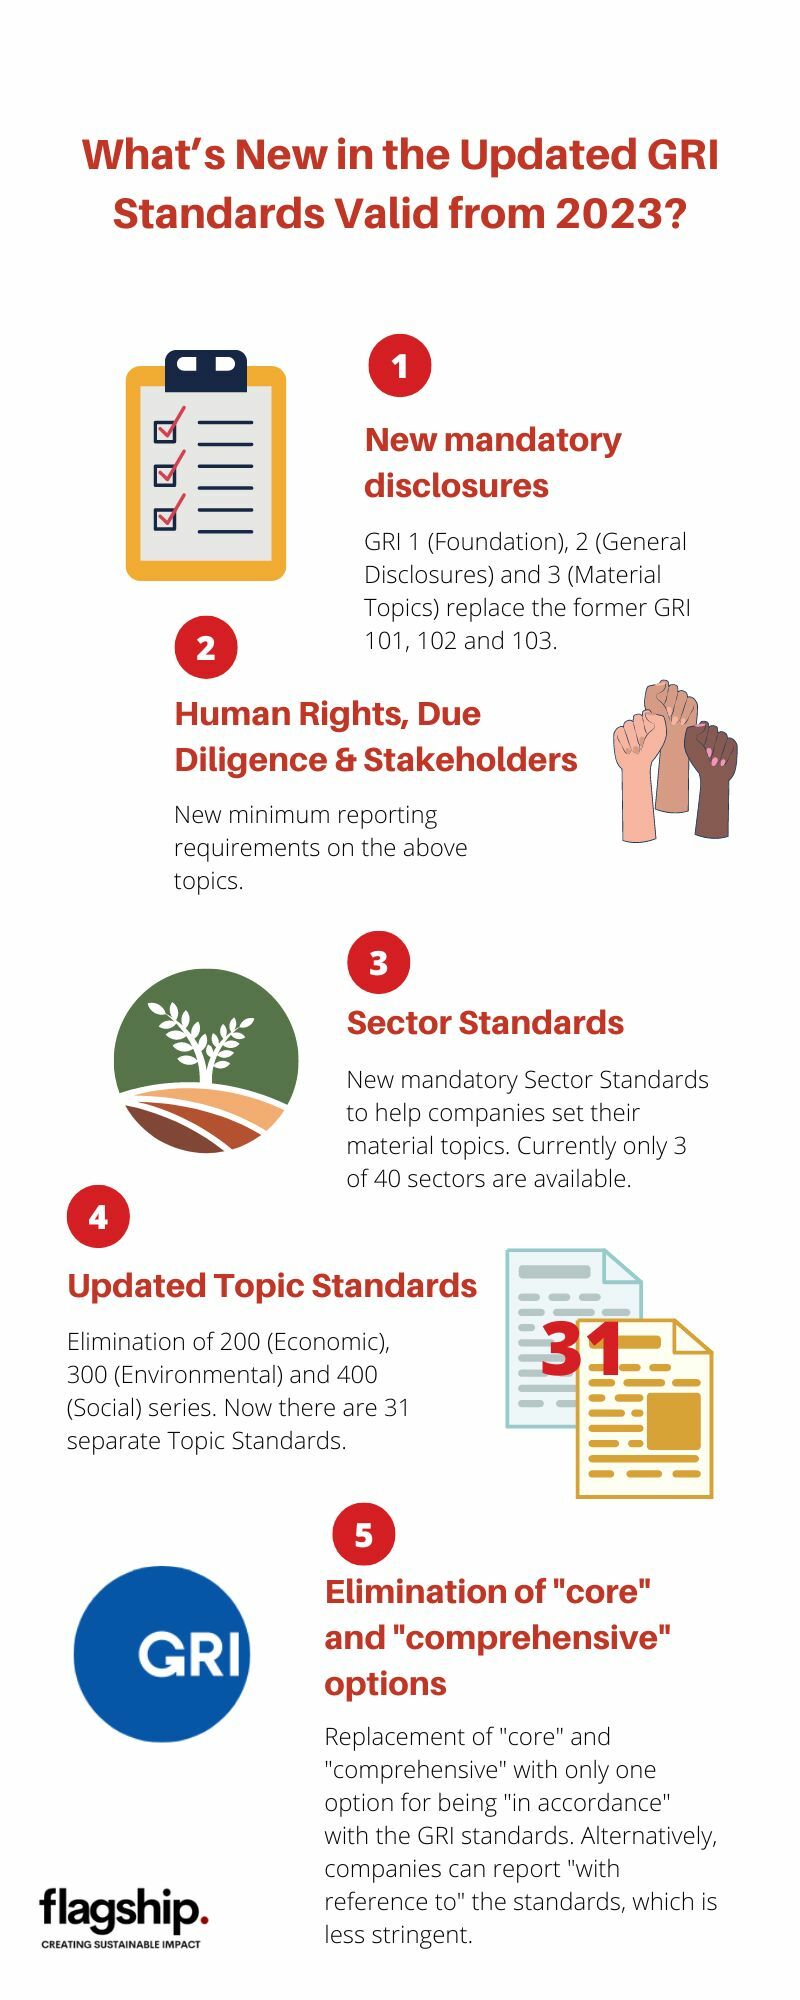 Infographic summarising new updated GRI standards valid from 2023.